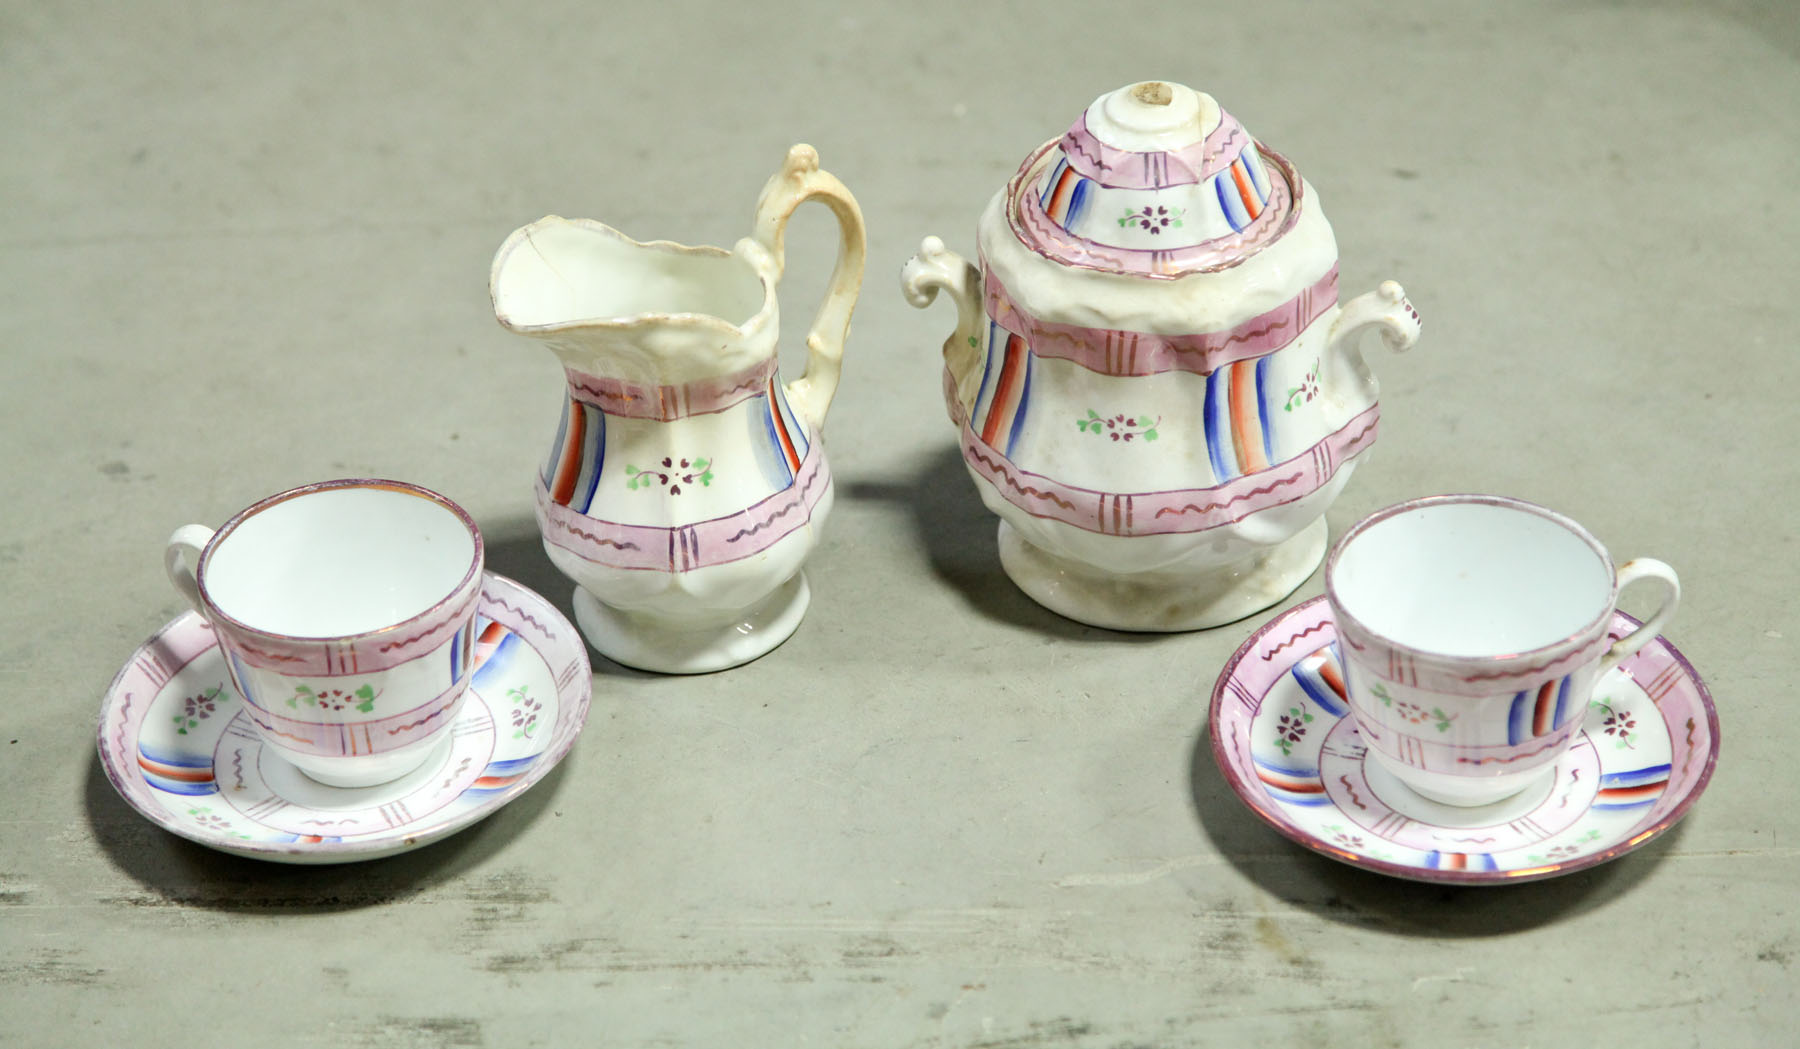 GROUP OF PINK RAINBOW LUSTER PORCELAIN.